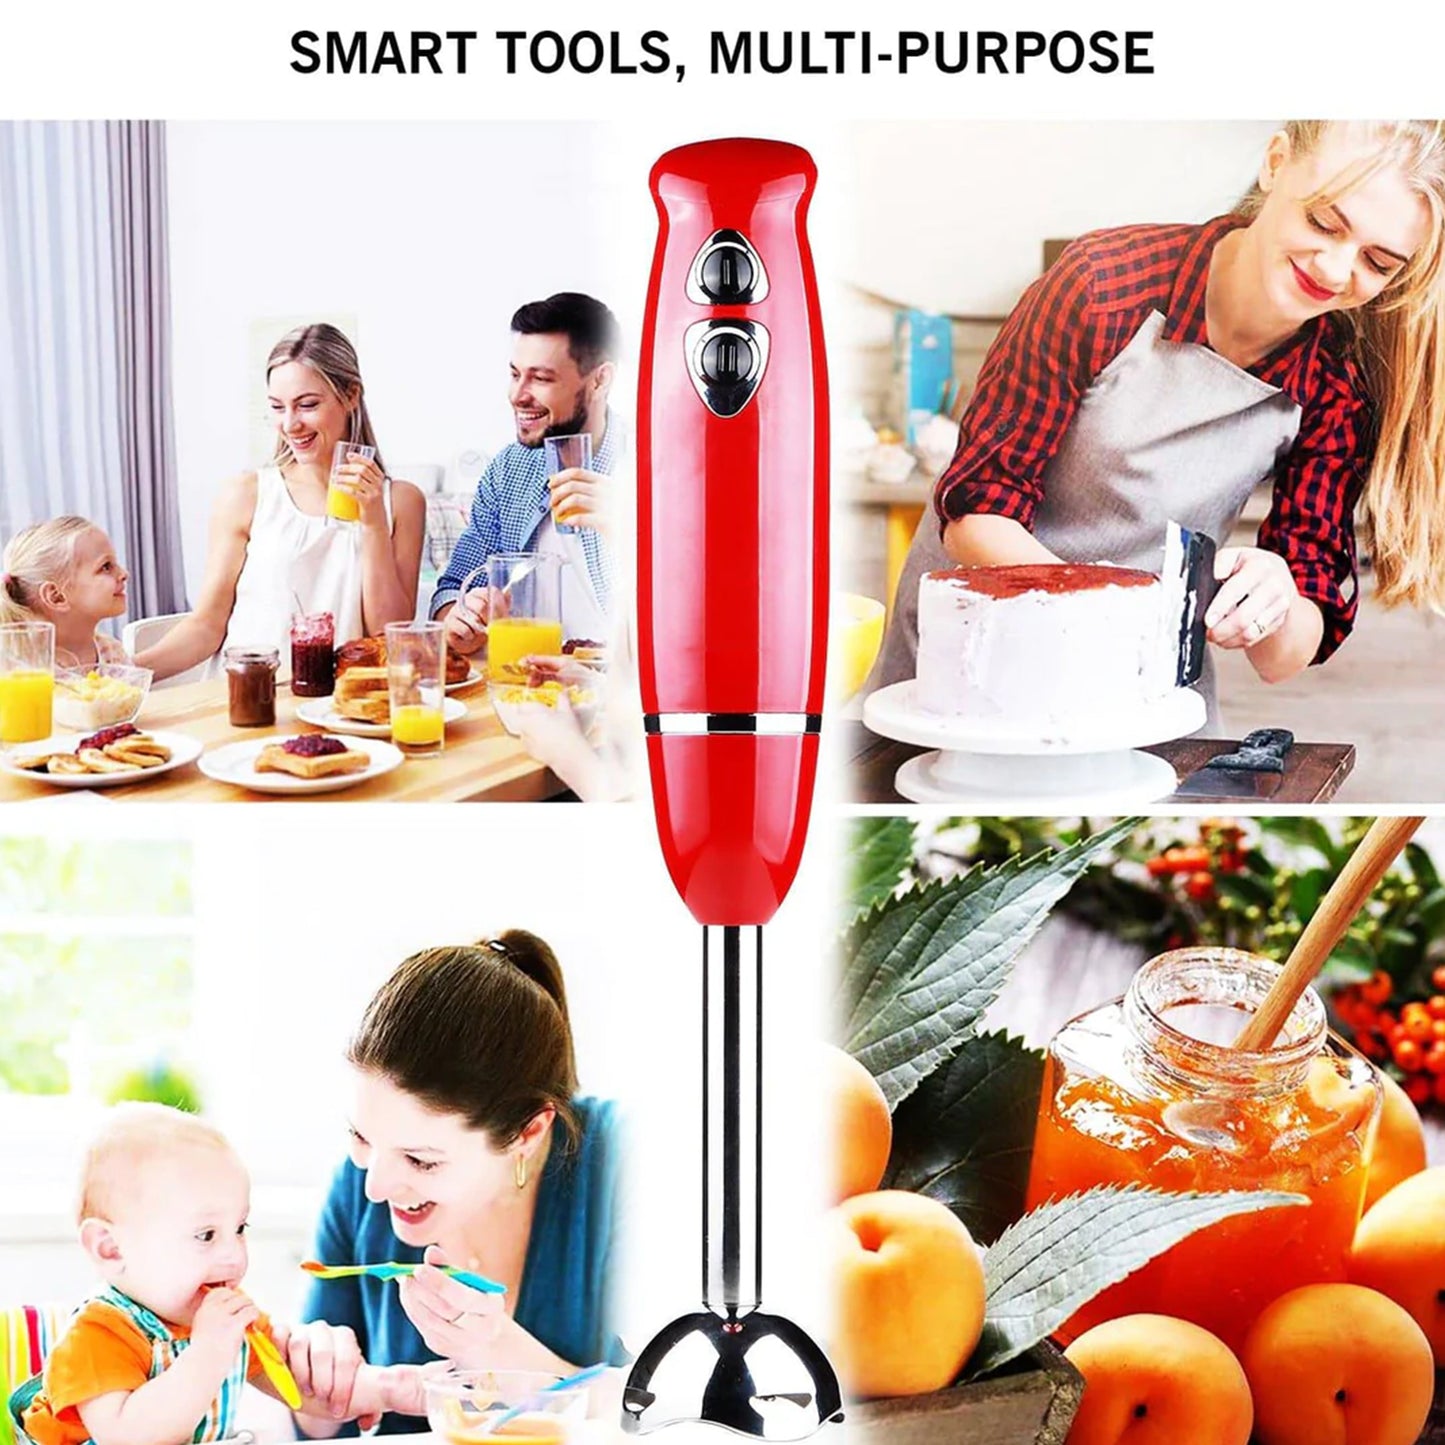 5 Core Handheld Blender, Electric Hand Blender 8-Speed 500W, Immersion Hand Held Blender Stick with Food Grade Stainless Steel Blades for Perfect Smoothies, Puree Baby Food & Soup - HB 1510 BLK/RED